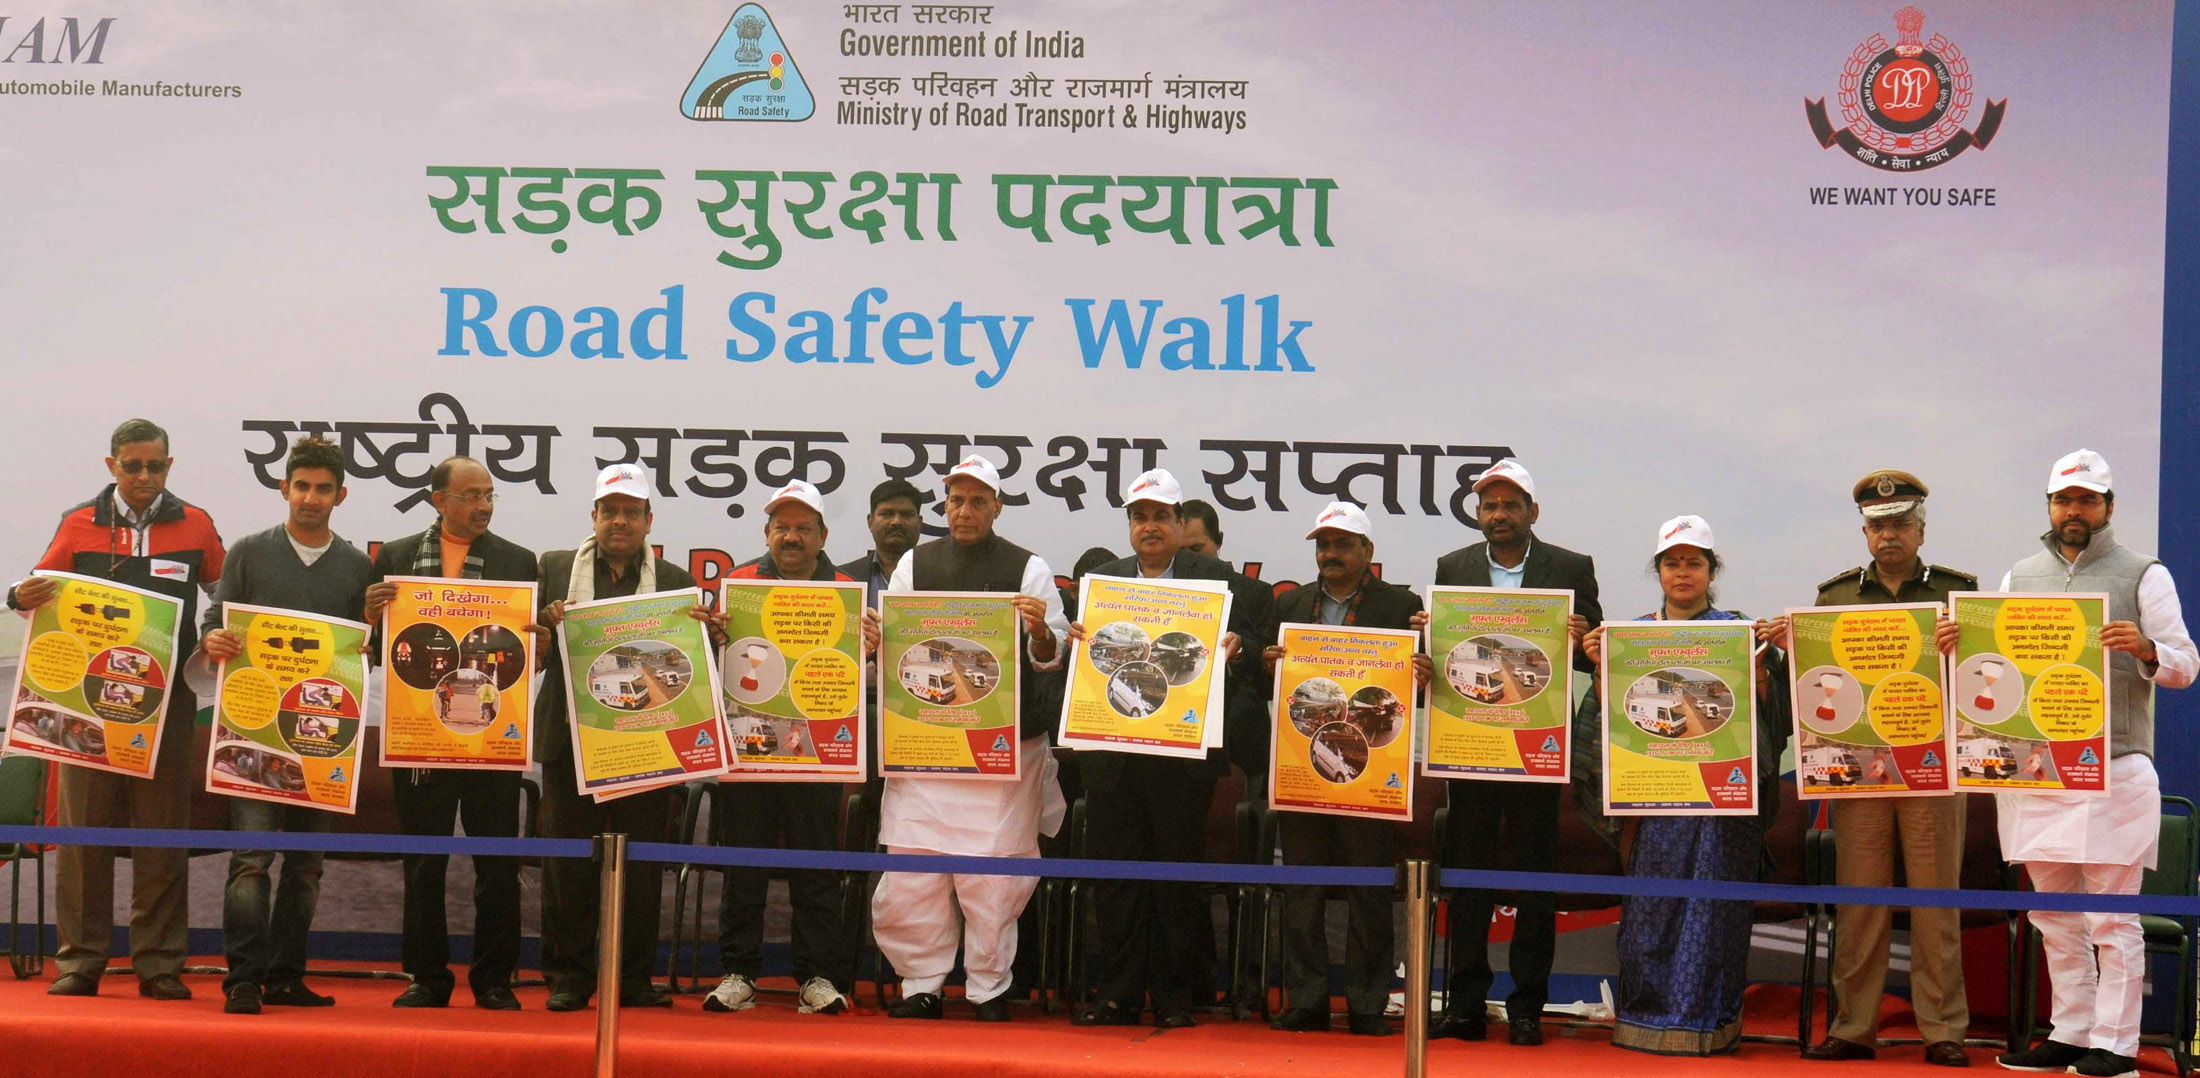 The Union Home Minister, Shri Rajnath Singh along with the Union Minister for Road Transport & Highways and Shipping, Shri Nitin Gadkari and the Union Minister for Science & Technology and Earth Sciences, Dr. Harsh Vardhan at the flag-off ceremony of the Road Safety Walk, in New Delhi on January 11, 2016.